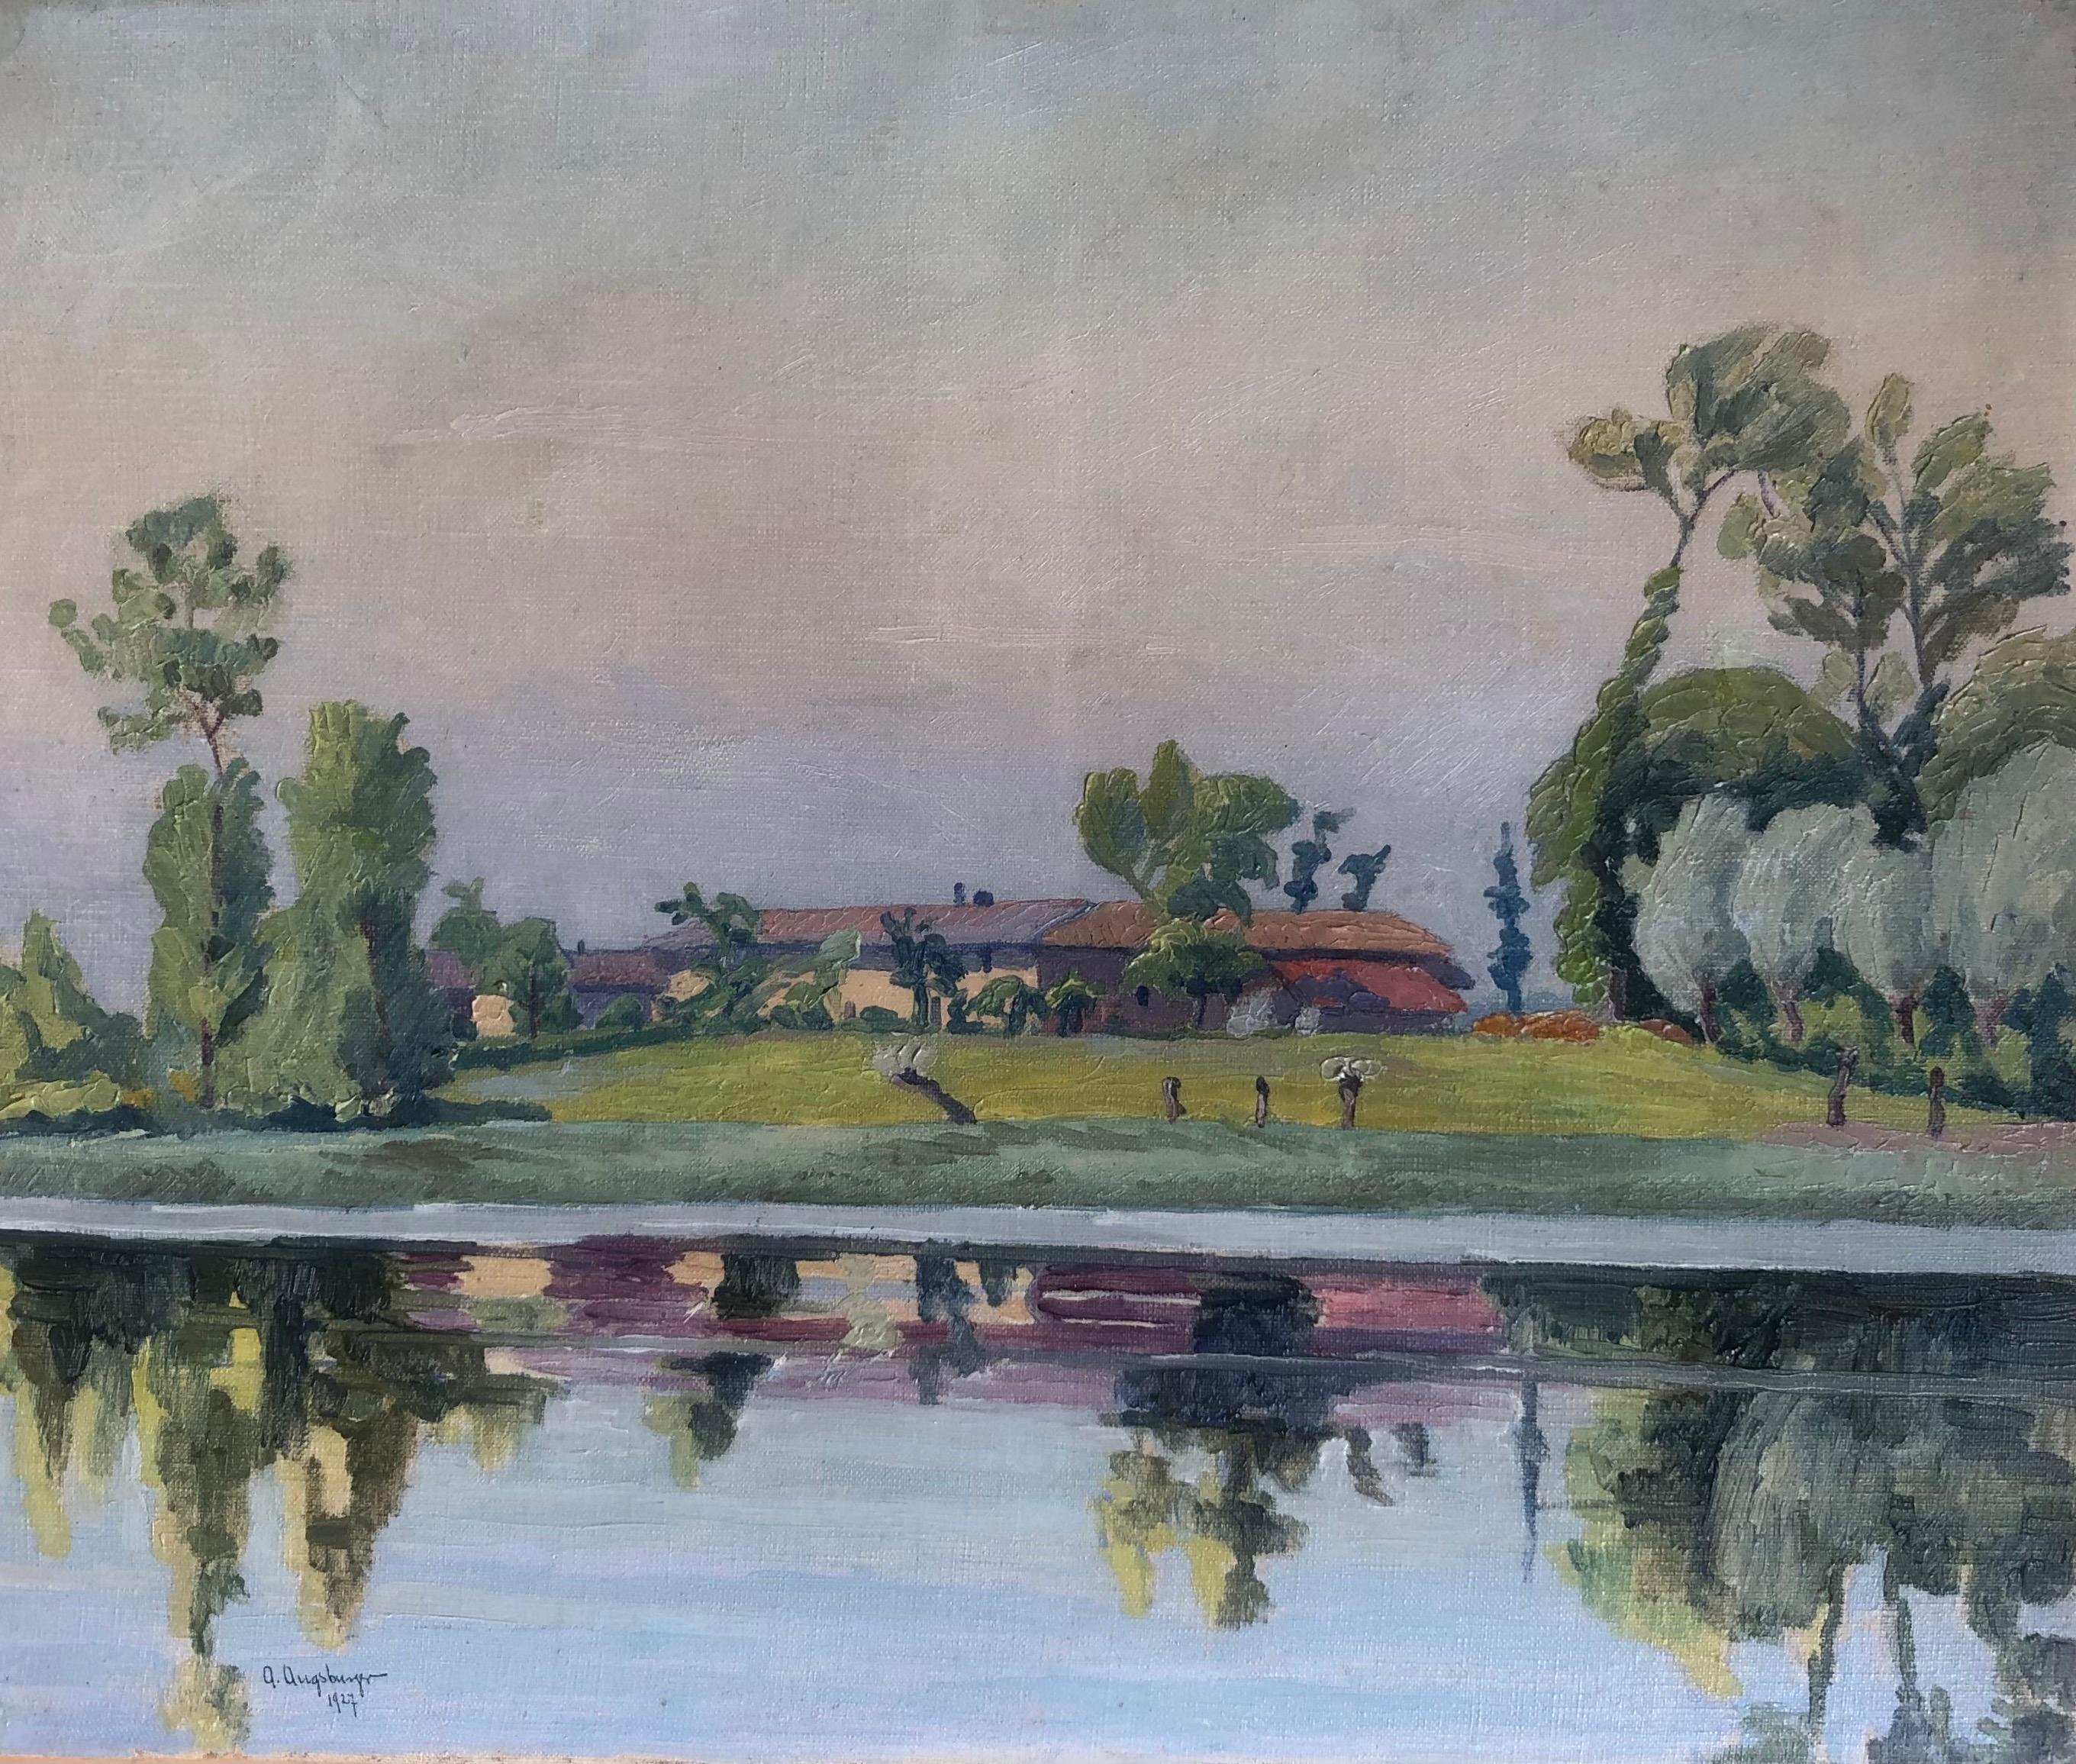 A. Augsburger Landscape Painting - Landscape by the lake